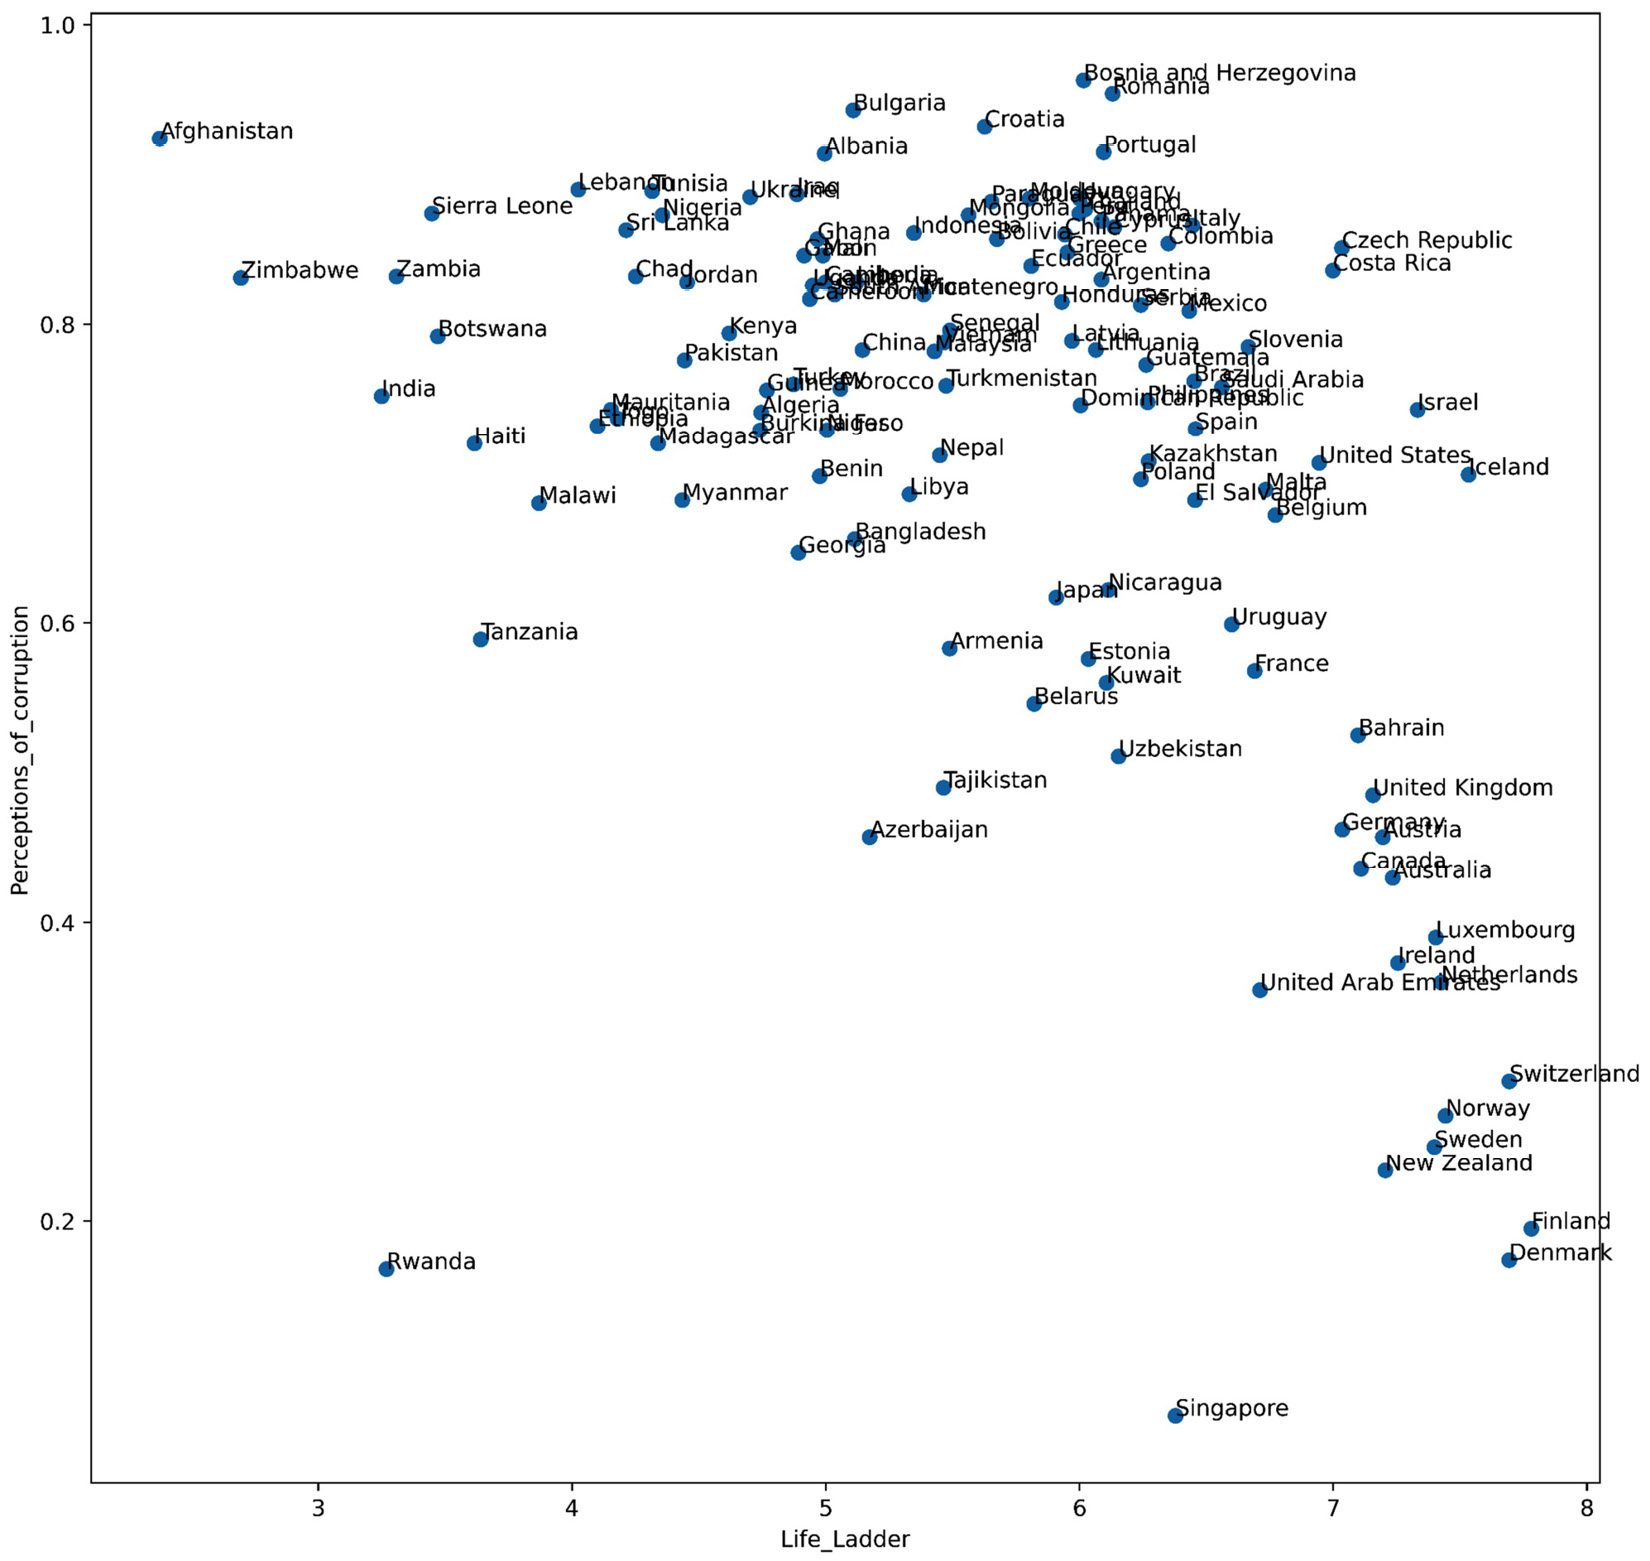 Figure 8.1 – Scatterplot of countries based on two happiness indices called Life_Ladder and Perception_of_corruption in 2019
